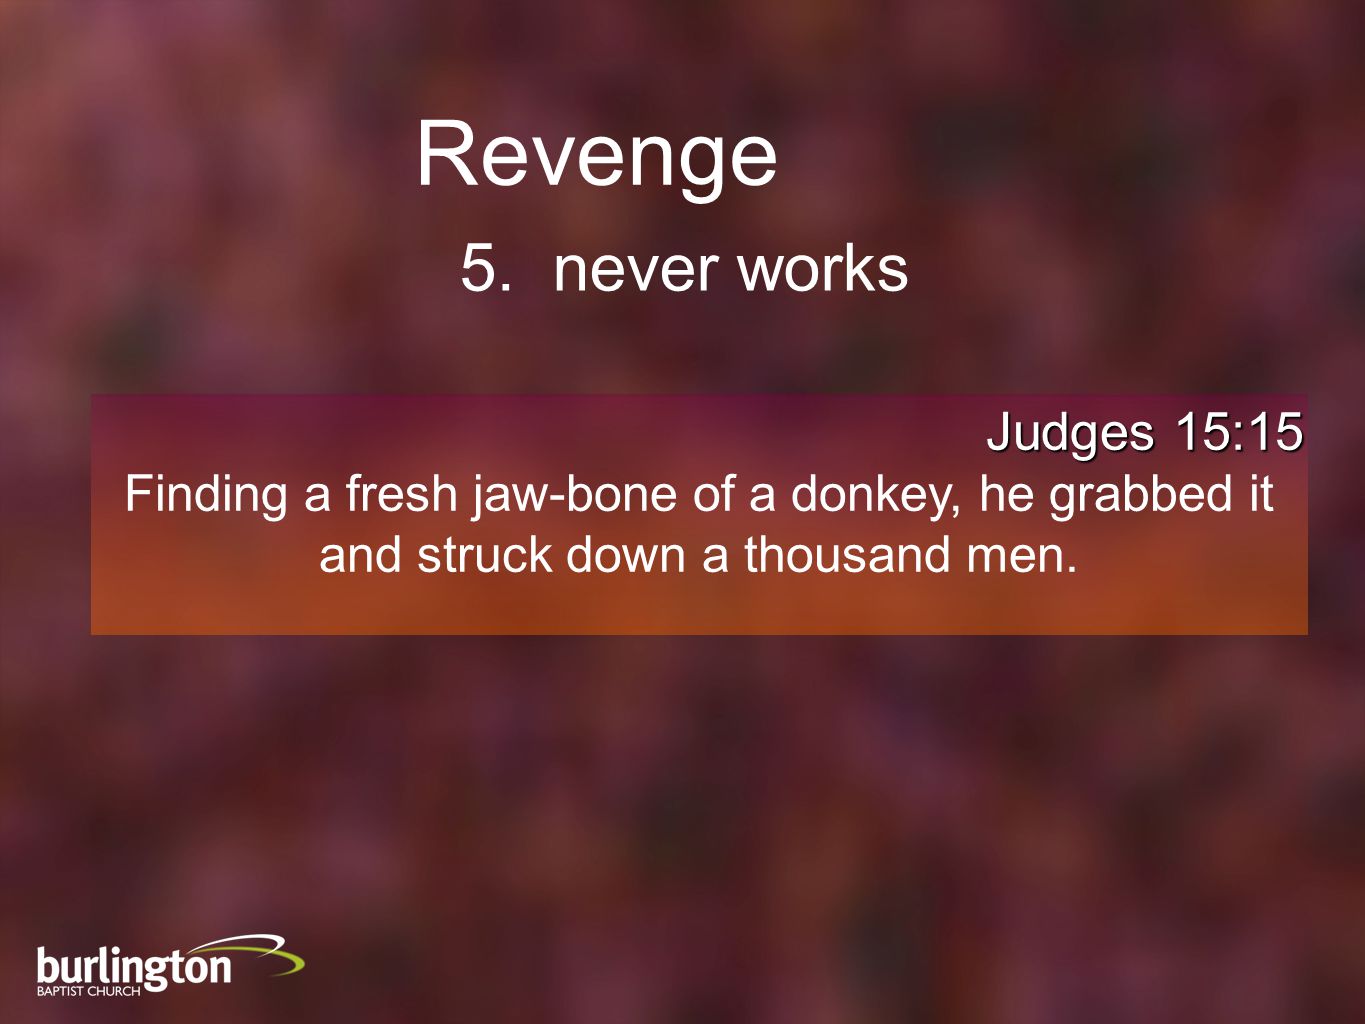 Judges 15:15 Finding a fresh jaw-bone of a donkey, he grabbed it and struck down a thousand men.